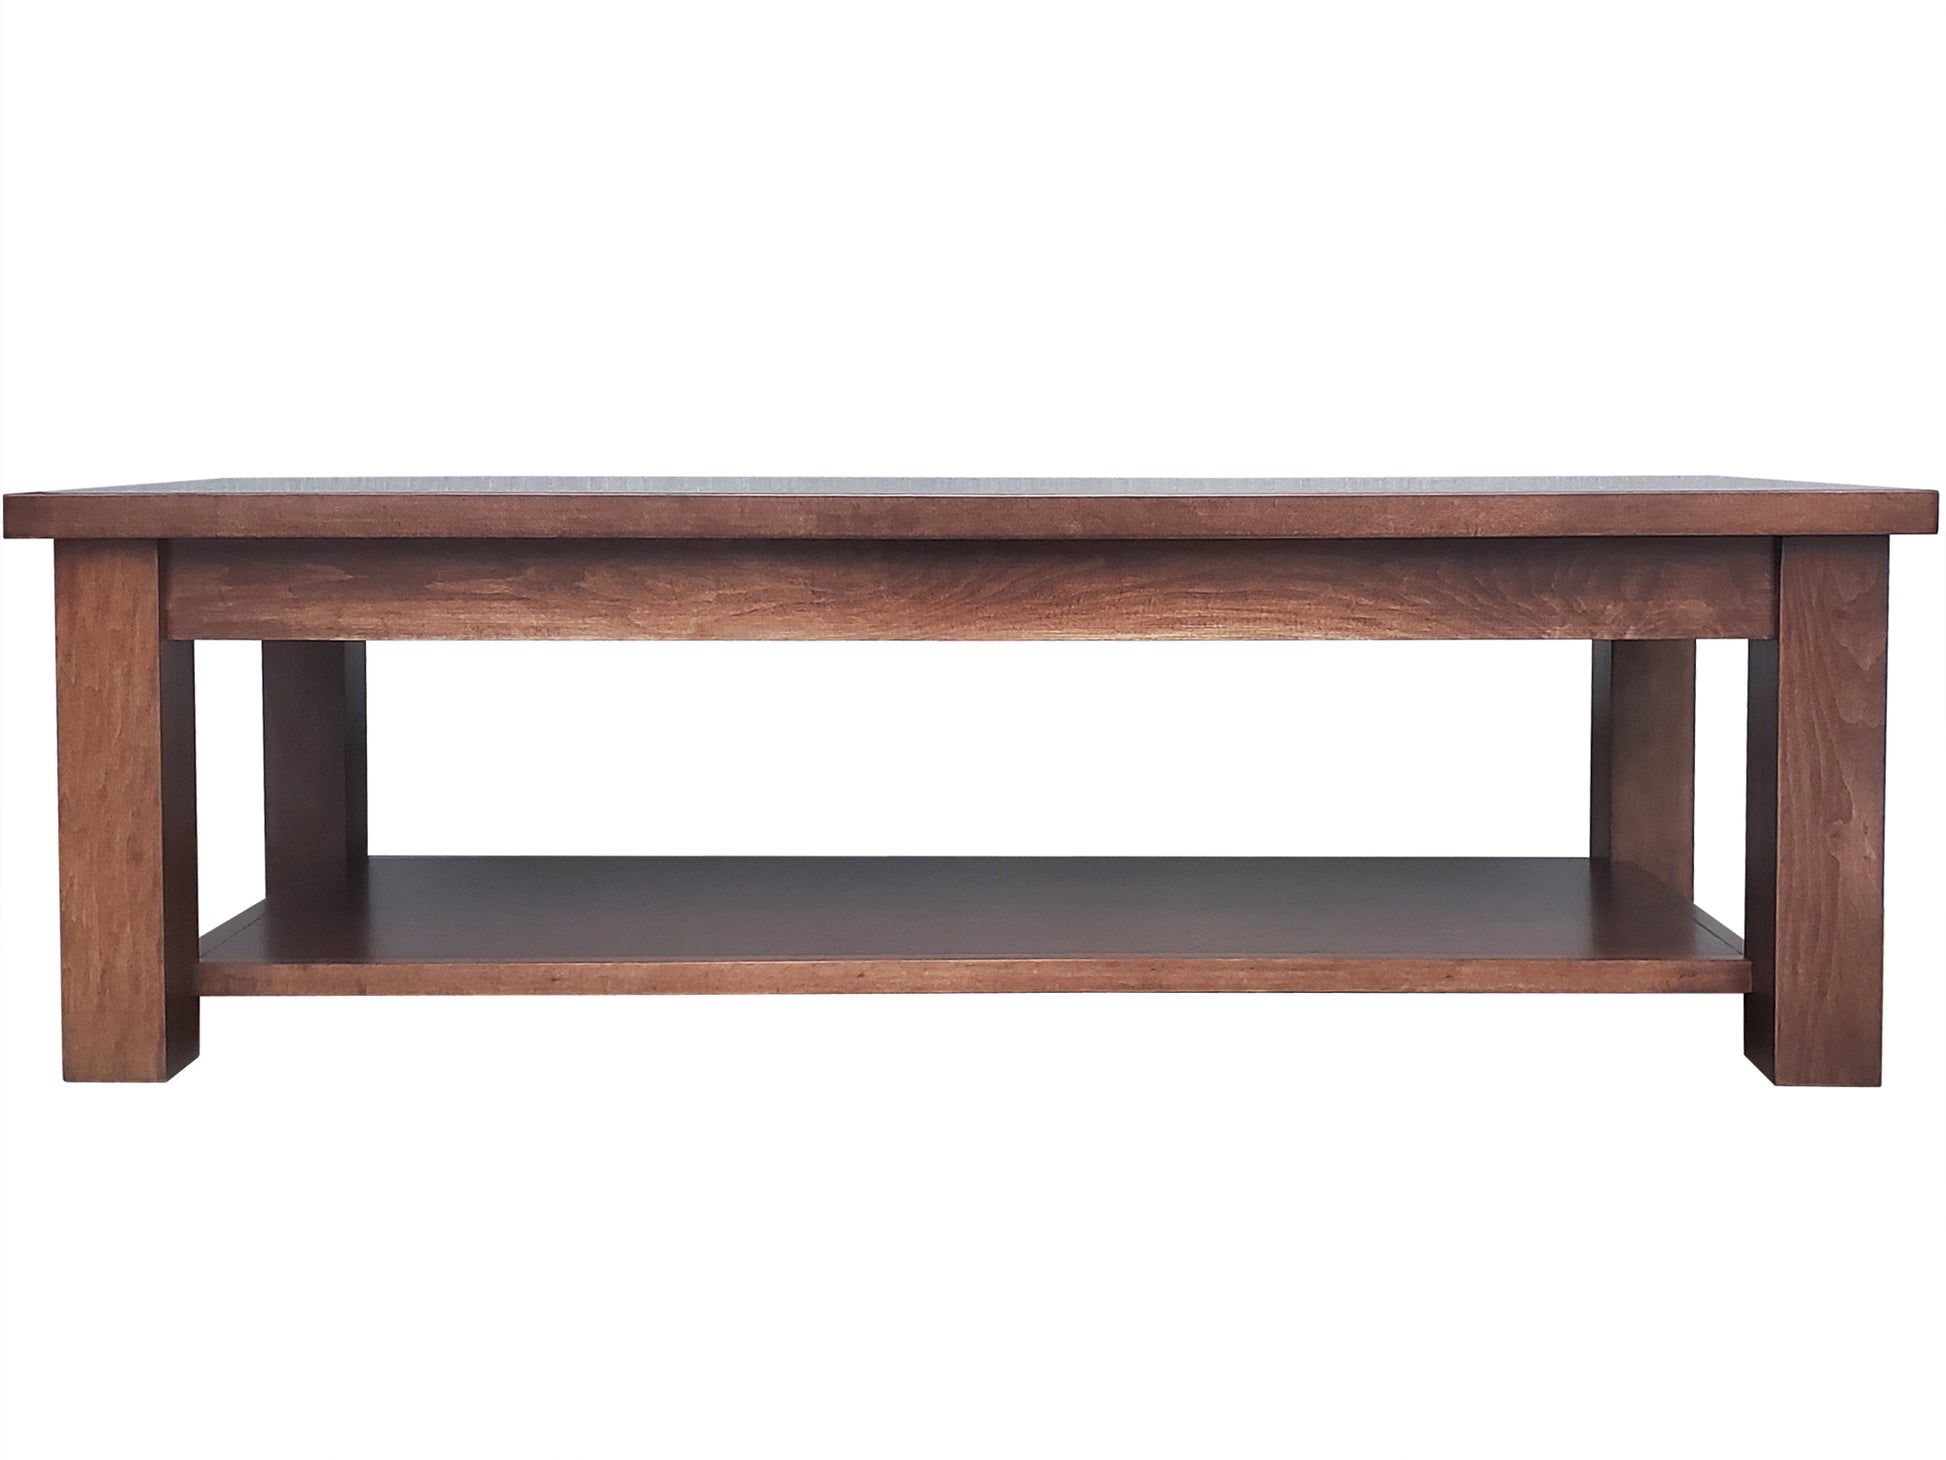 Vadero Coffee Table - solid wood, locally built, Canadian made